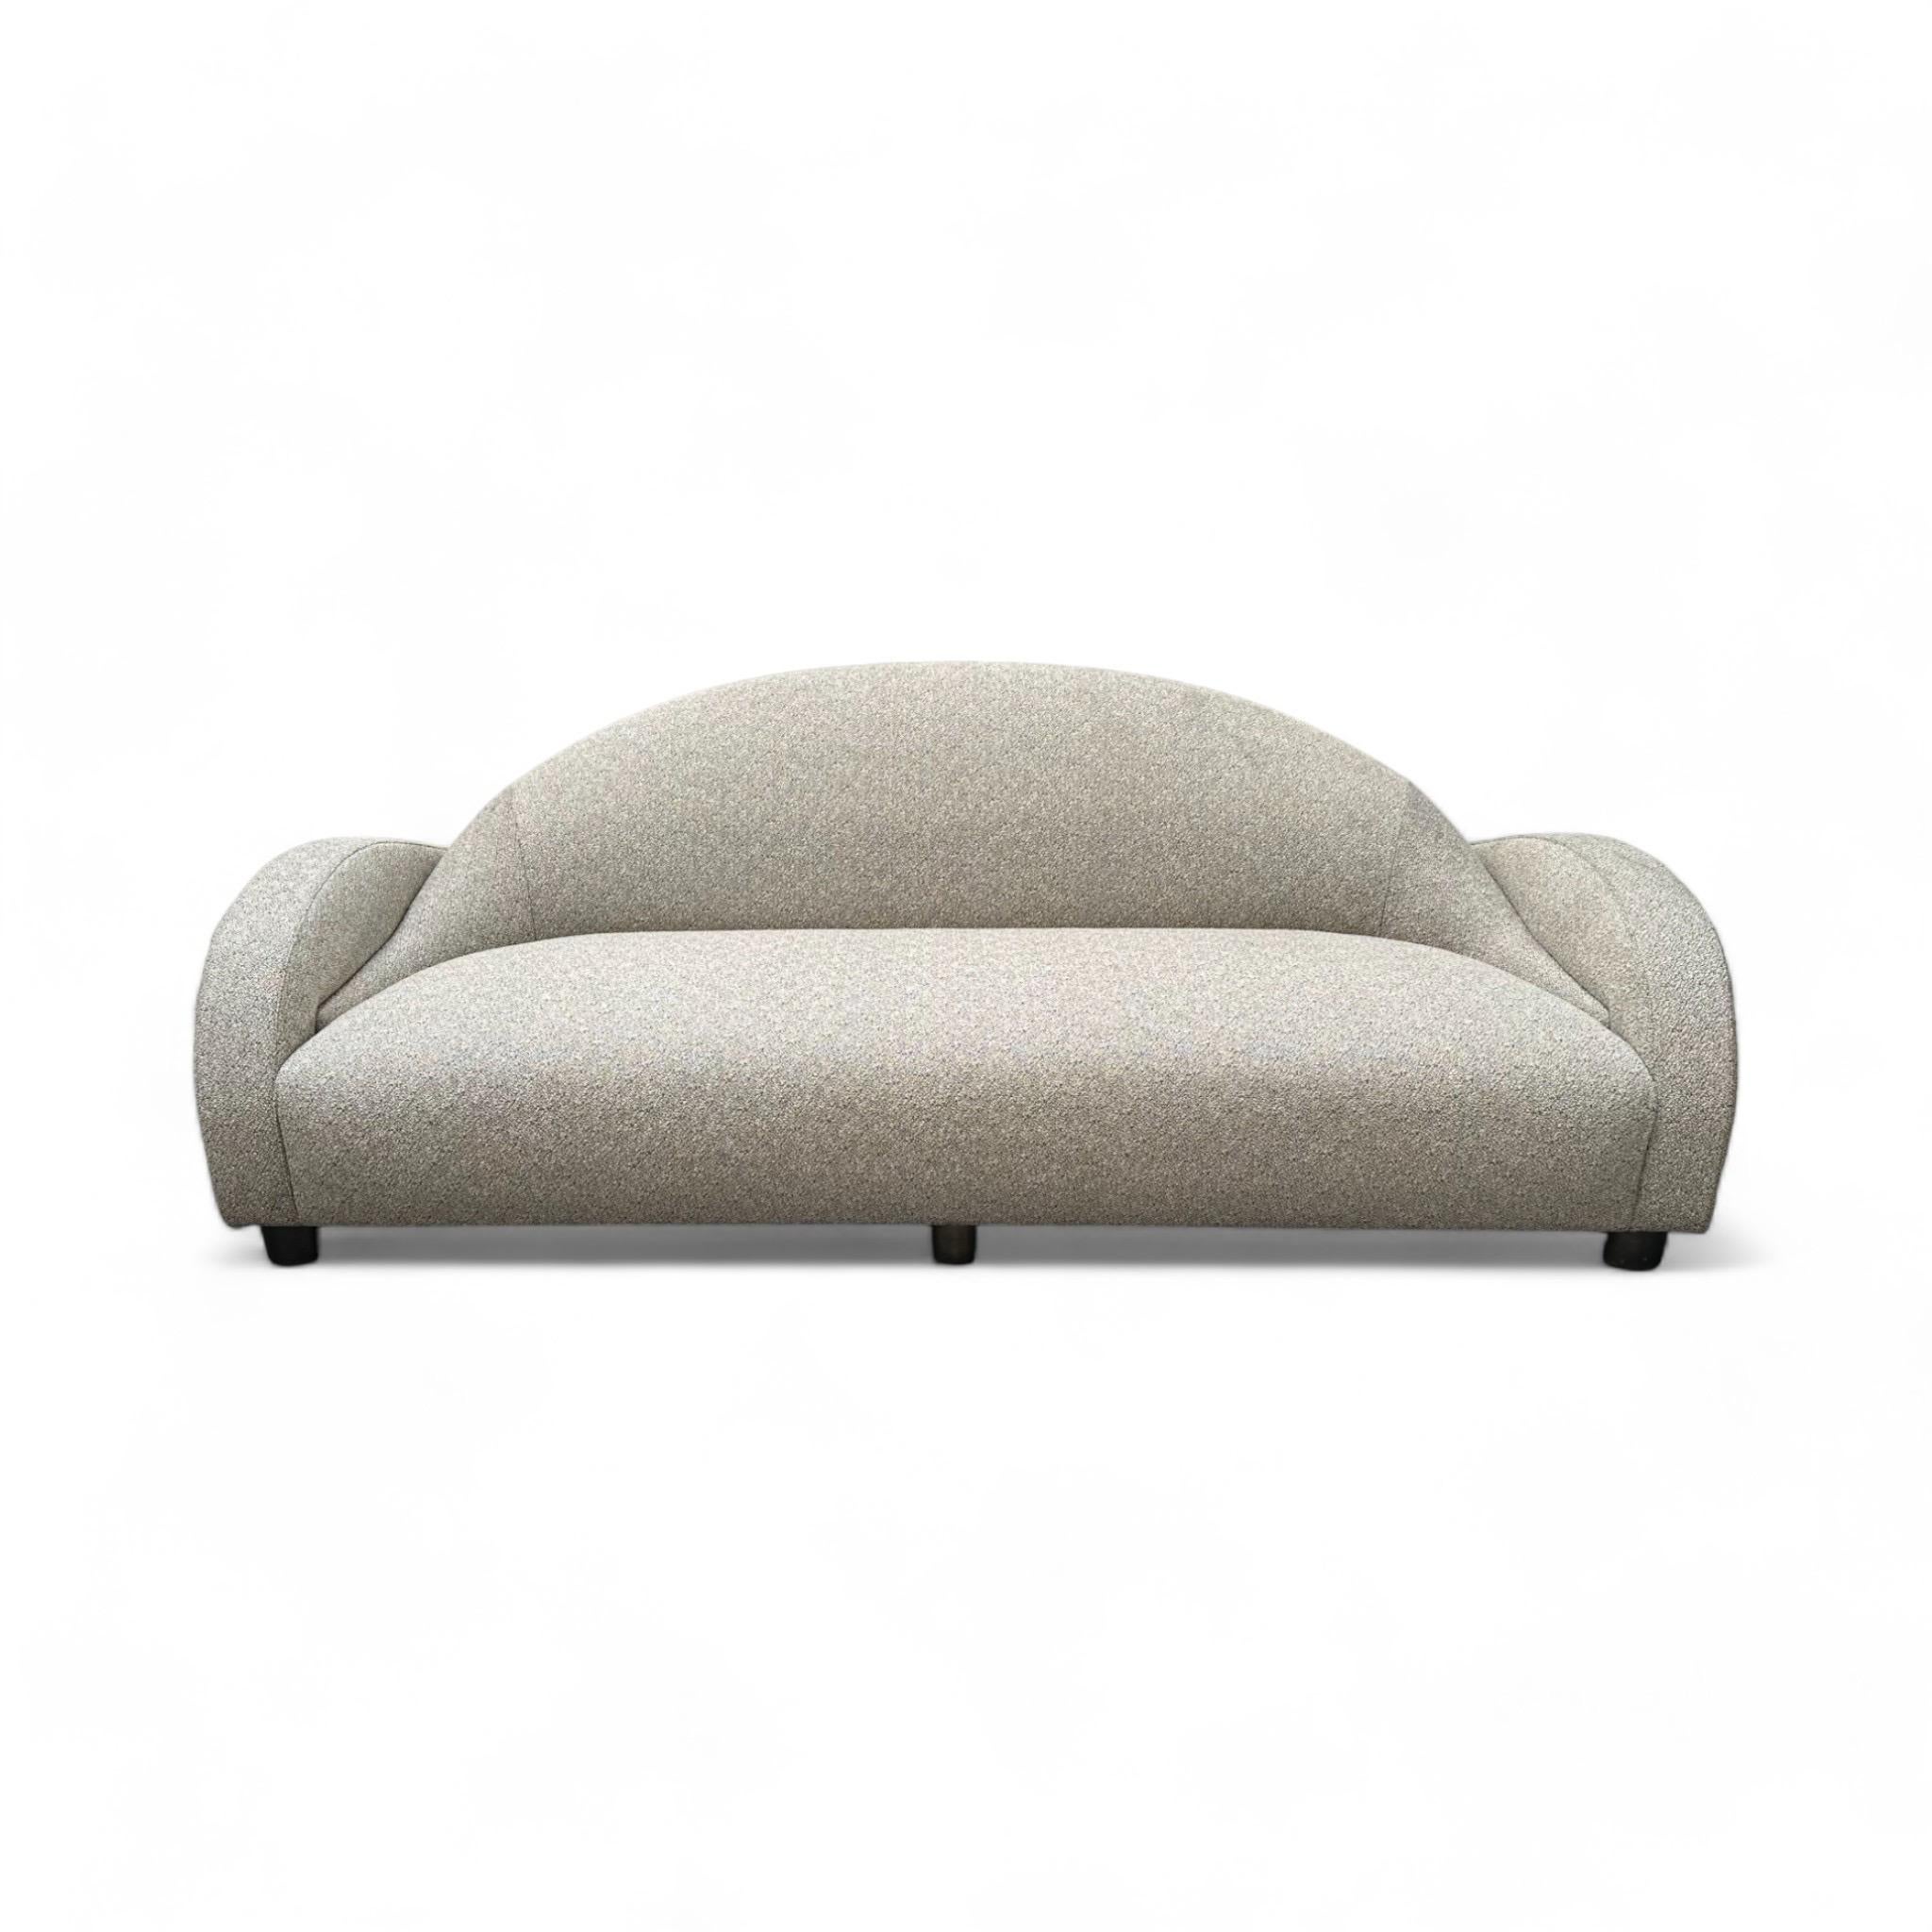 Jean De Merry Curvao Sofa

Description
Wood Frame
High- Density Foam
Wood Legs

Dimensions
W92″  x  D44.5″  x  H30.25″

Seat Depth 26.5″
Seat Height 16.75″

Jean de Merry was established in 2001. A marriage of quality craftsmanship and luxury